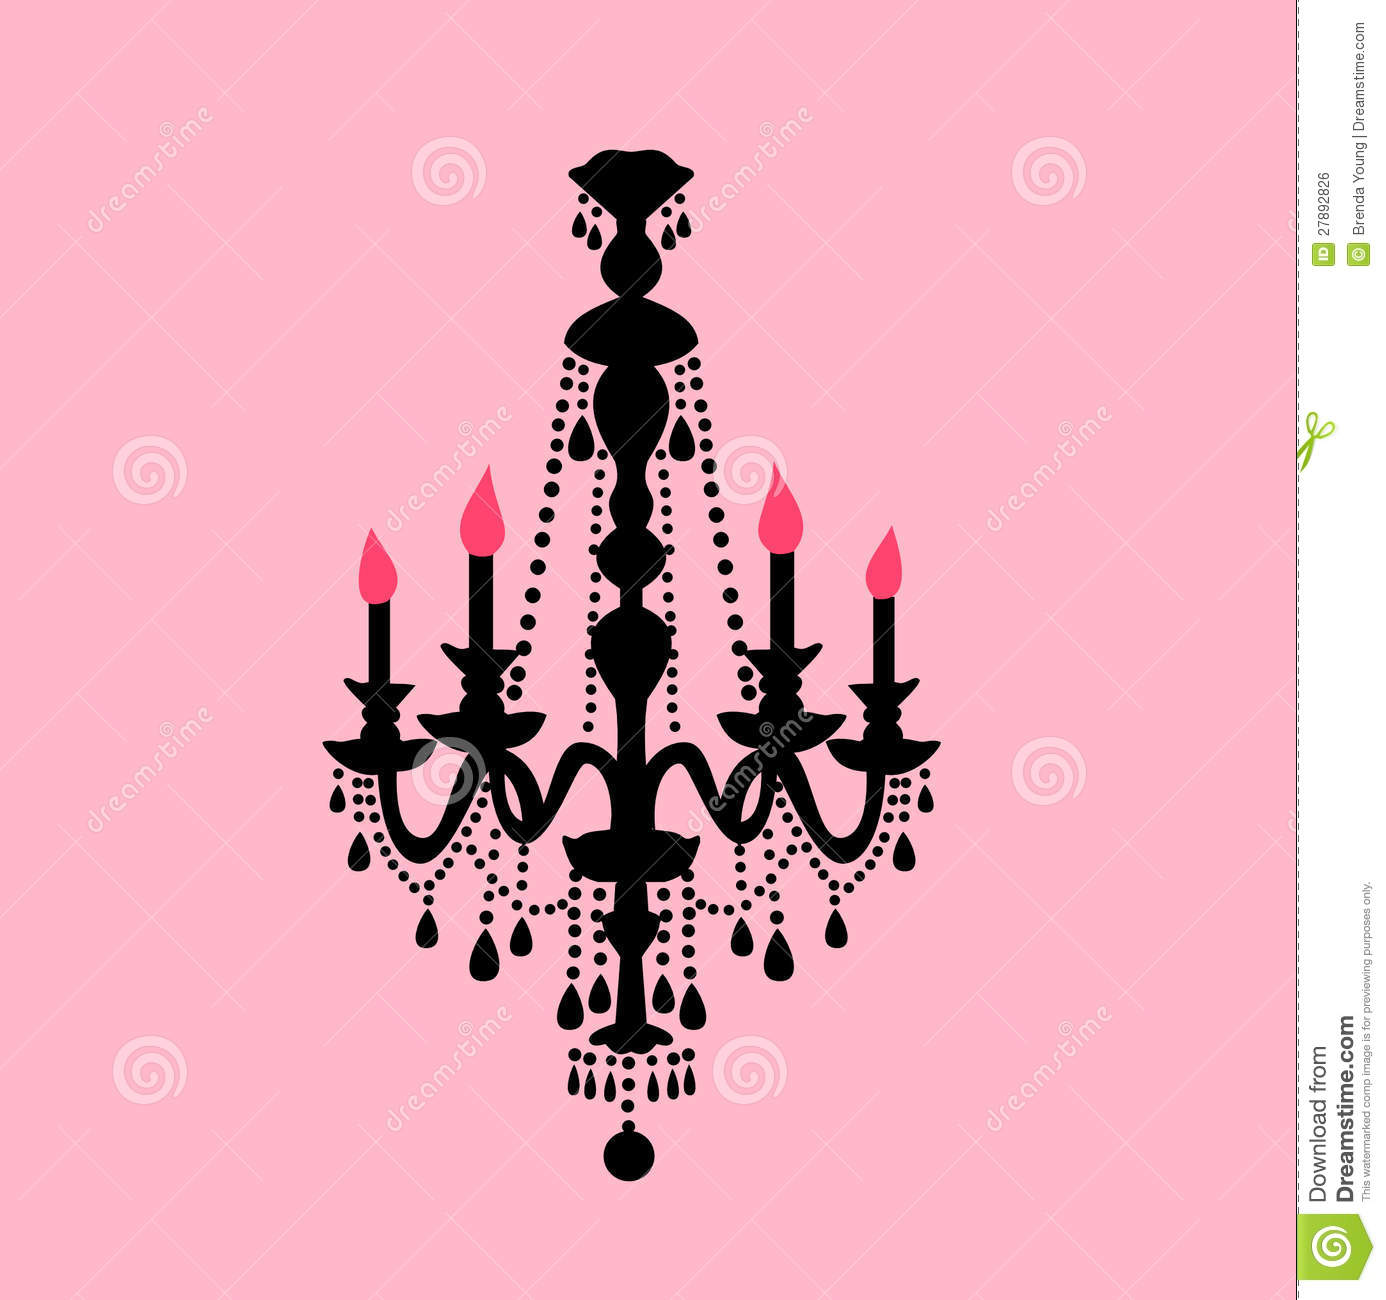 Chandelier Royalty Free Stock Image   Image  27892826